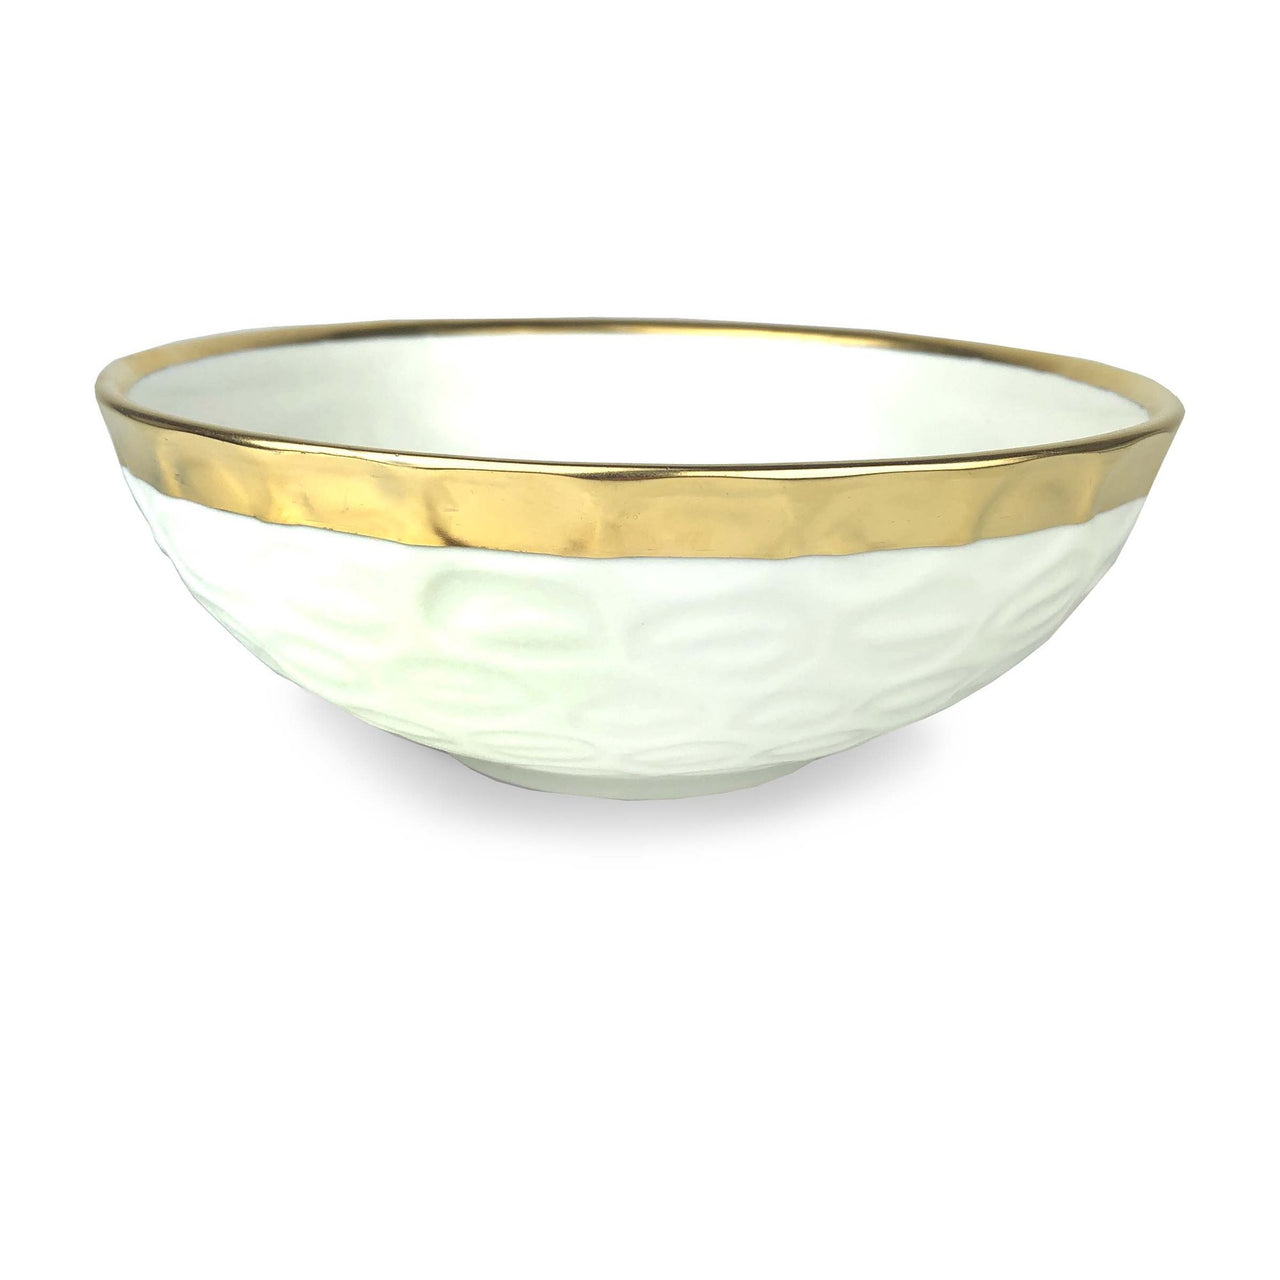 Truro Bowl Collection in Gold (Available in 2 Sizes)